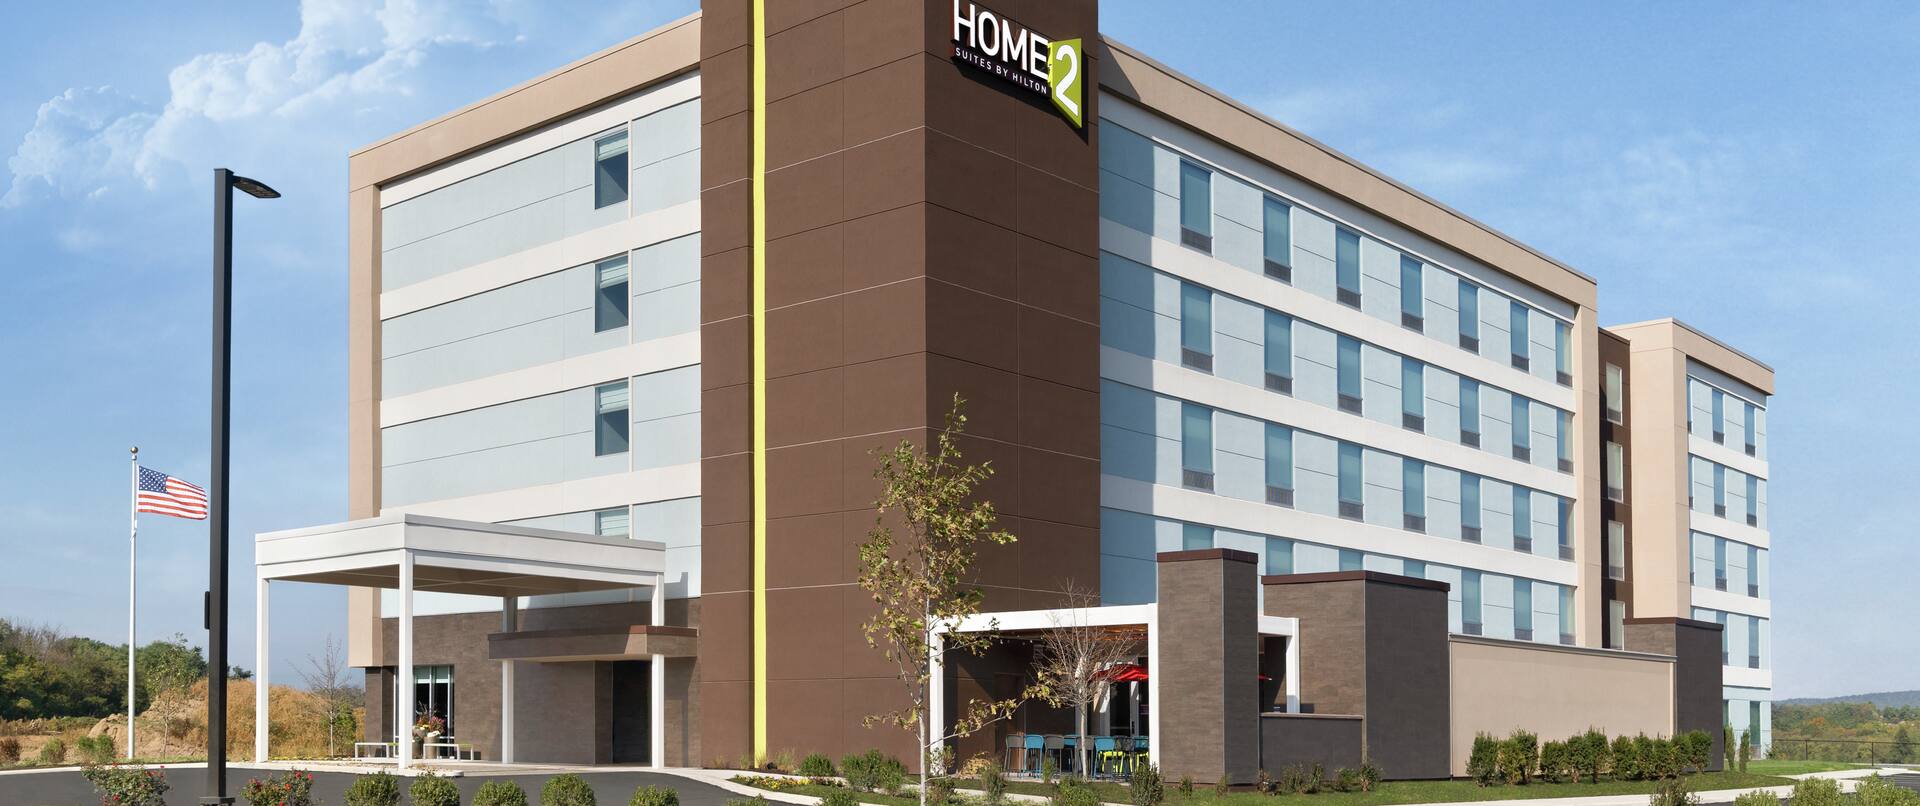 Modern Home2 Suites Hotel exterior featuring porte cochere, American flag on pole, and bright blue sky.